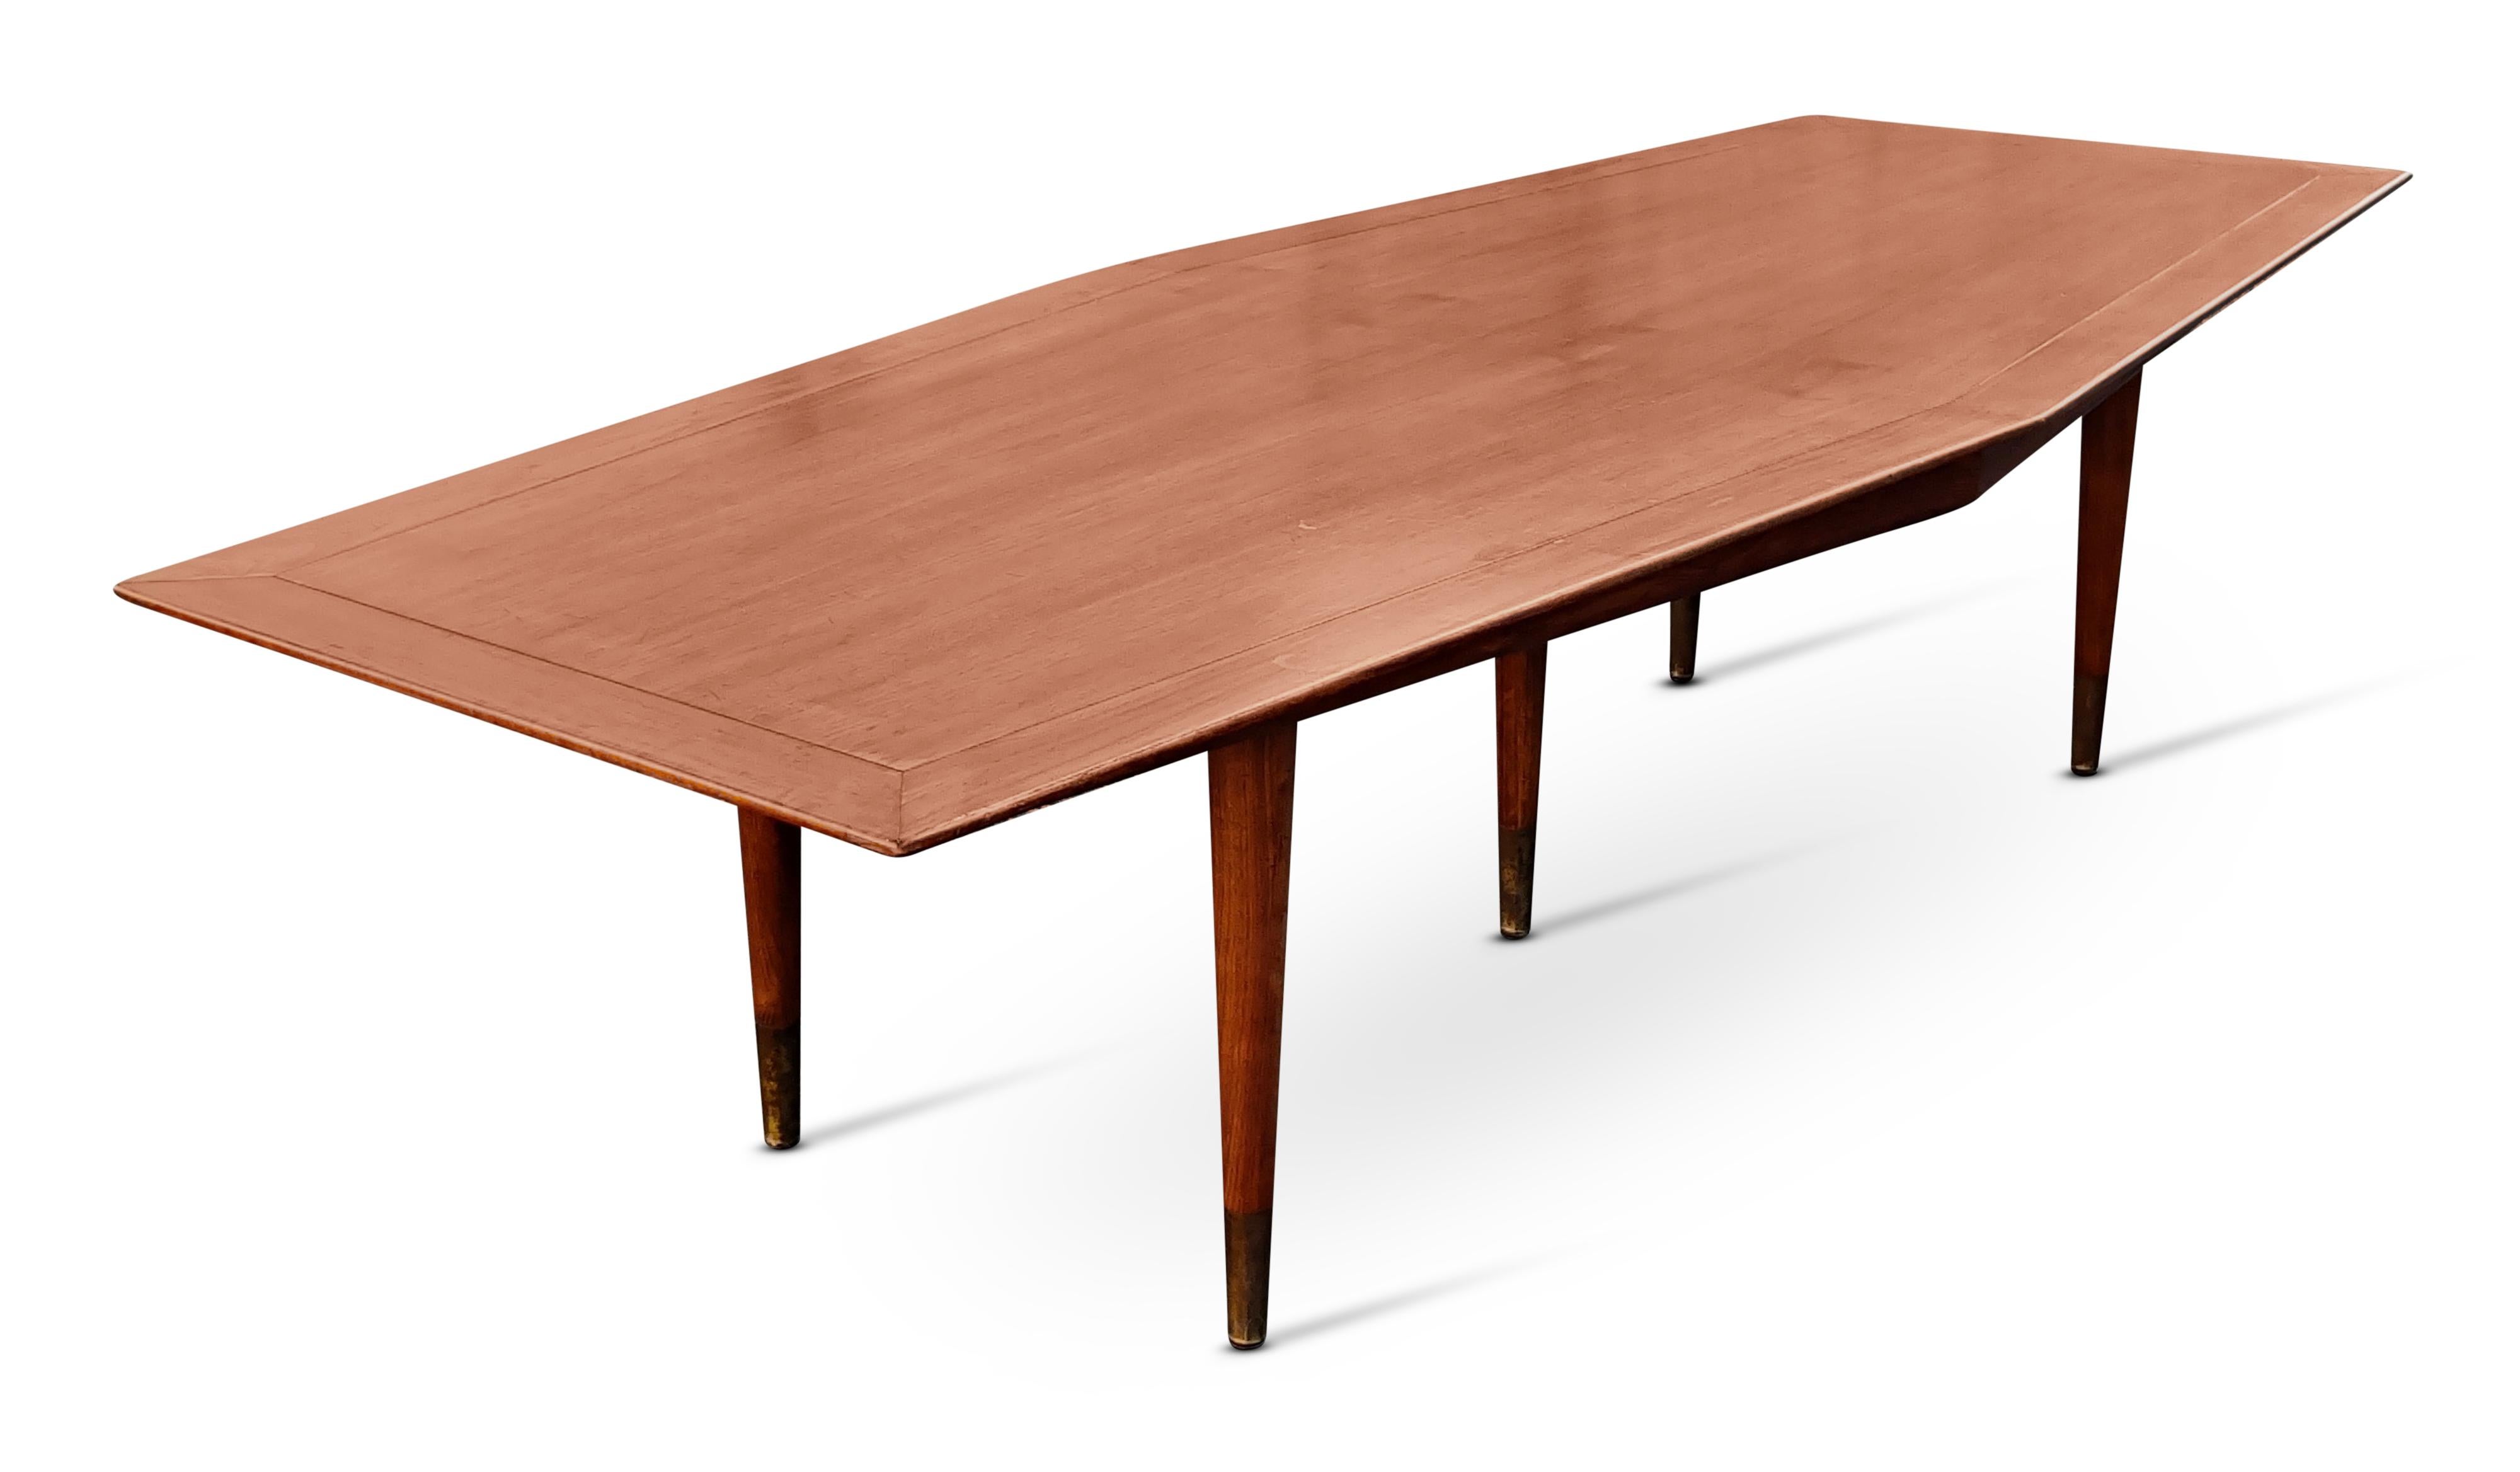 This vintage and classic Stow Davis table is very large (10' long) and very cool! Designed by Giacomo Buzzitta in the 1950s, the design has held up extremely well. Easily one of the most unique and beautiful tables to come out during the MCM era, it